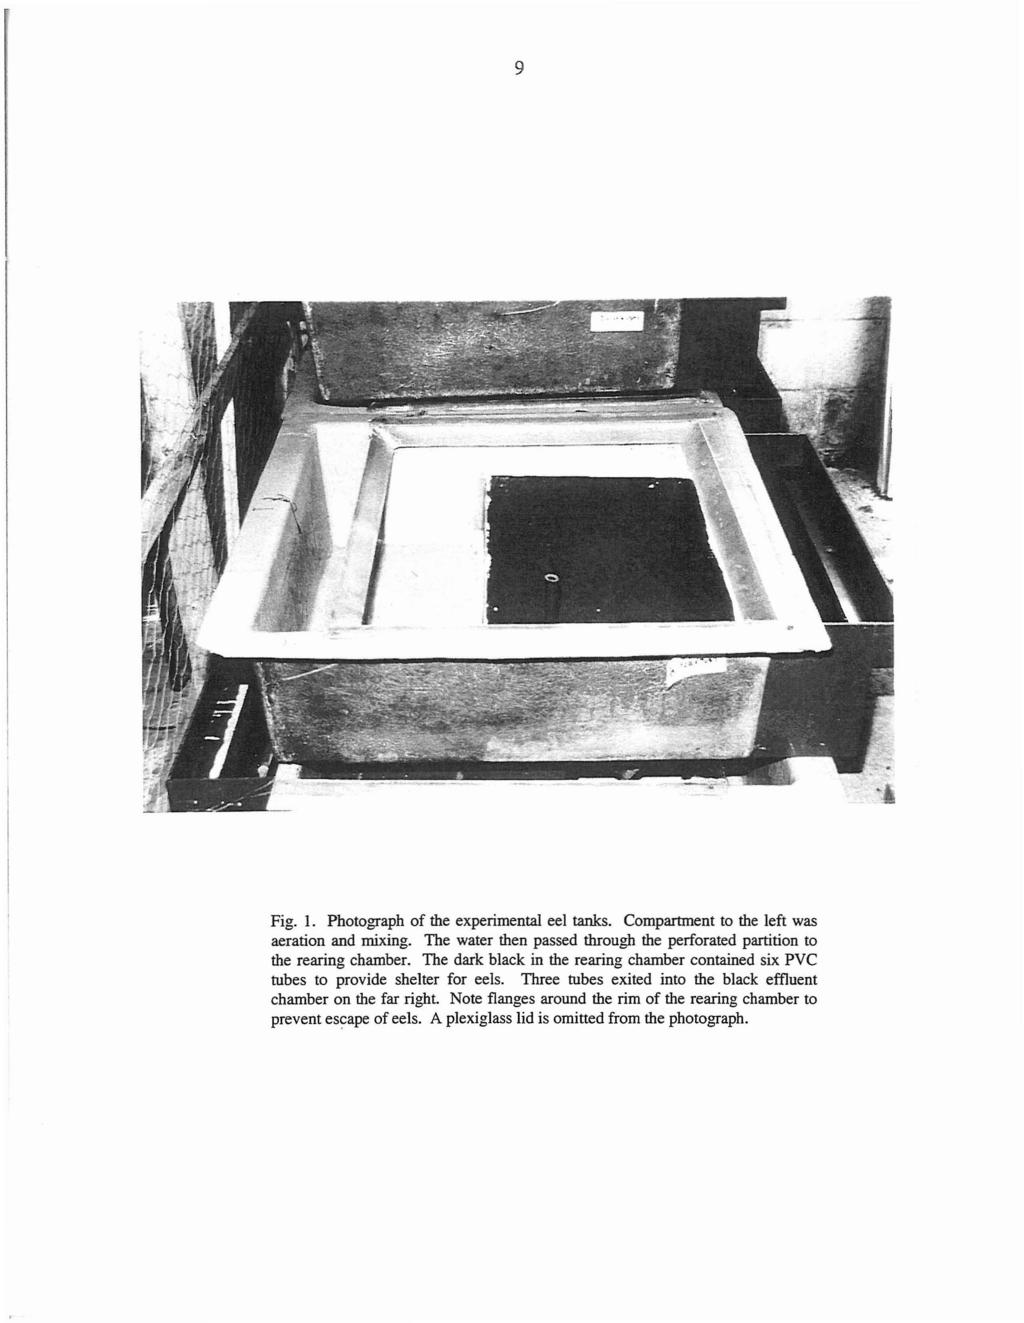 9 Fig. 1. Photograph of the experimental eel tanks. Compartment to the left was aeration and mixing. The water then passed through the perforated partition to the rearing chamber.